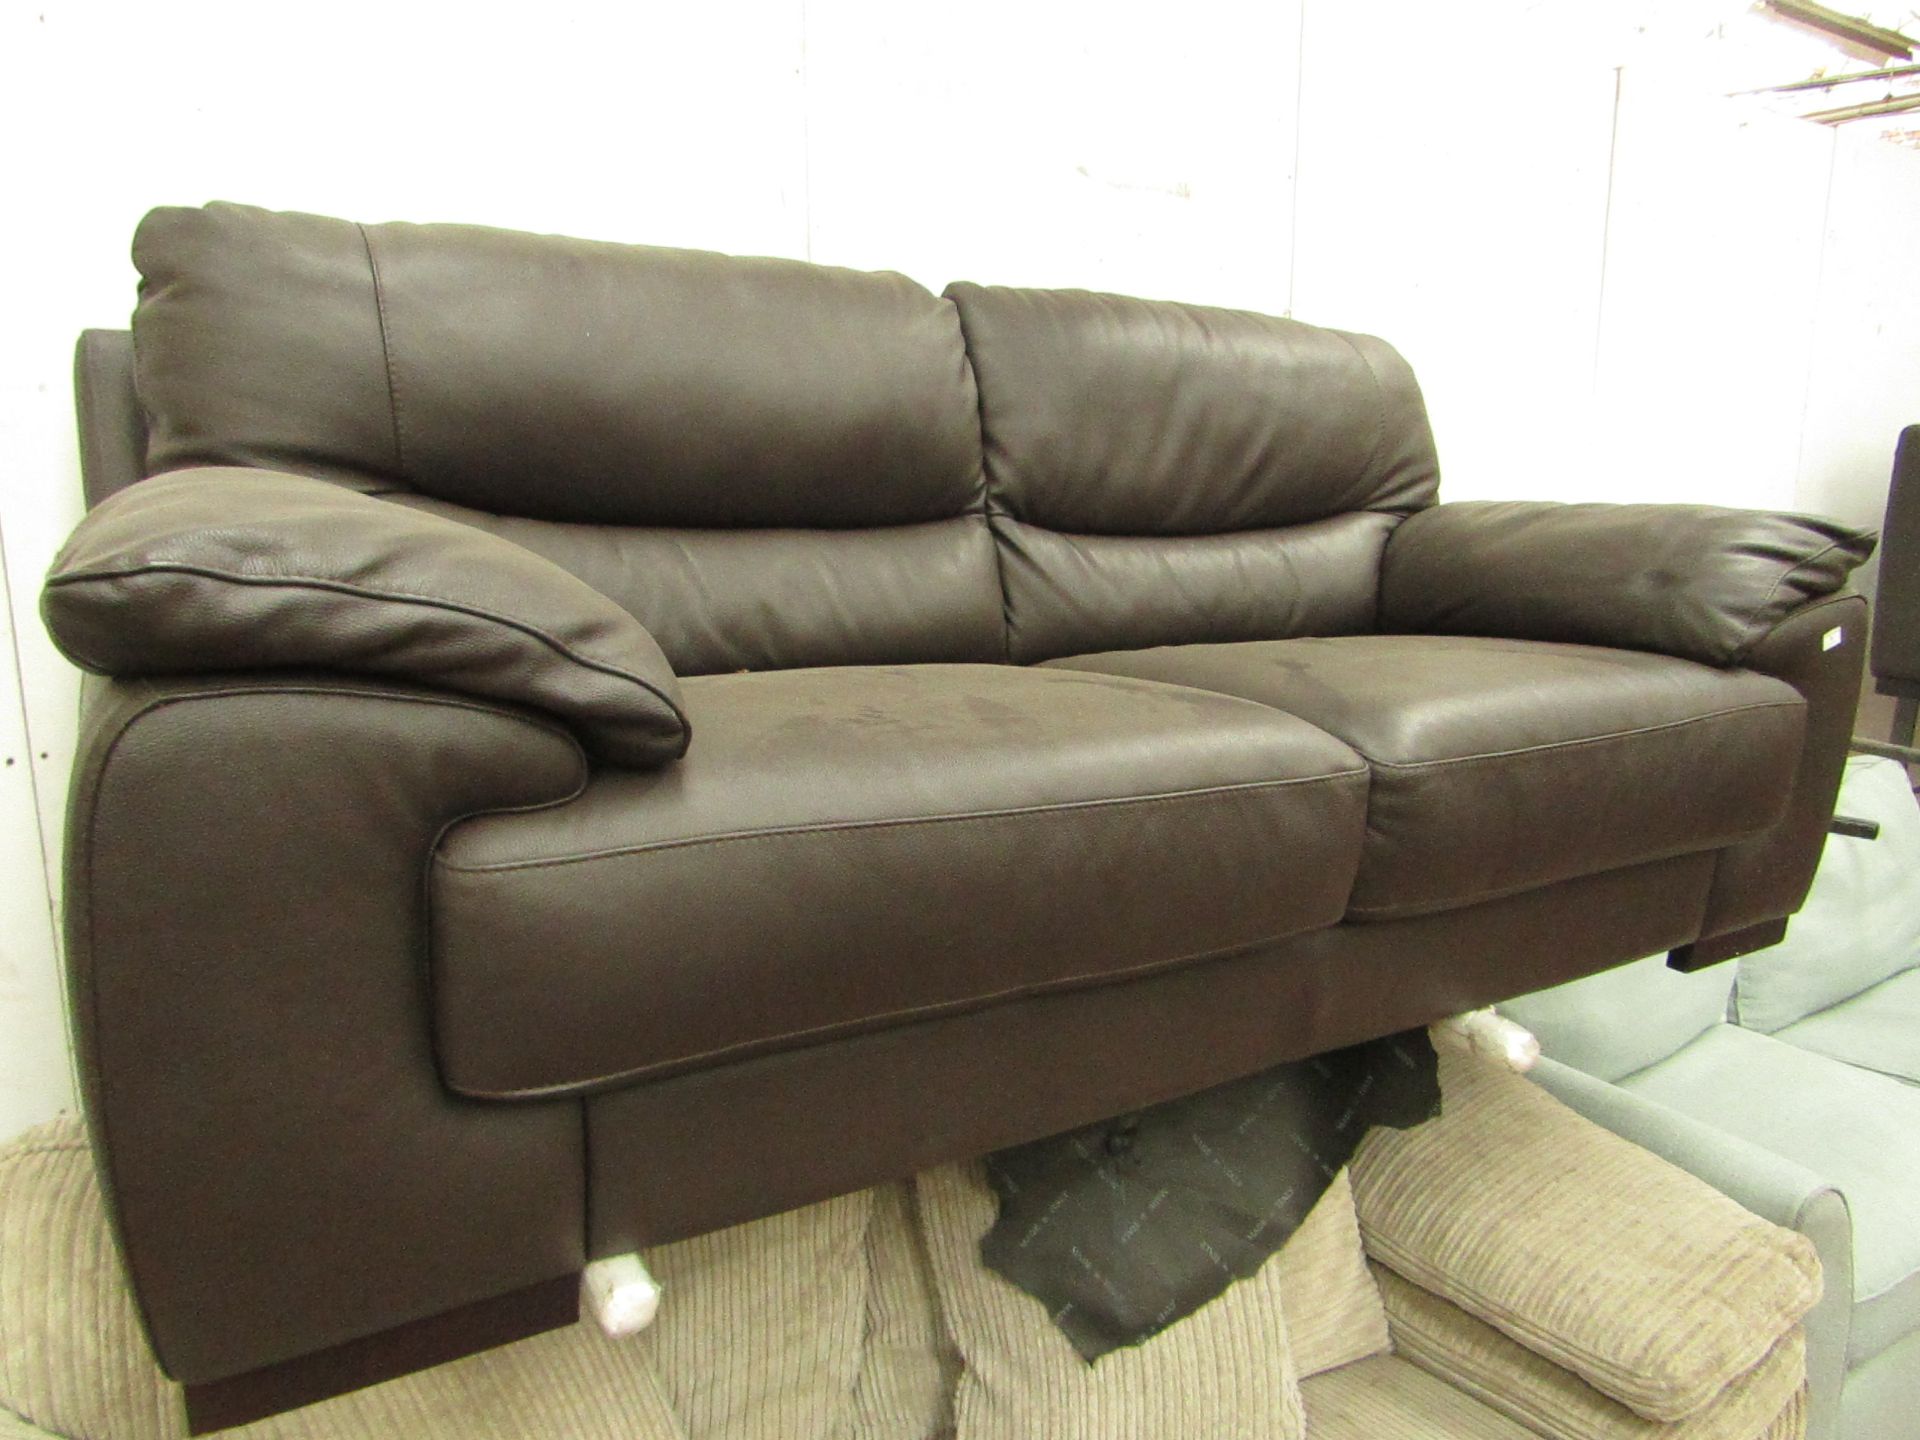 International contemporary designs Leather 2 seater sofa, no visible damage found.